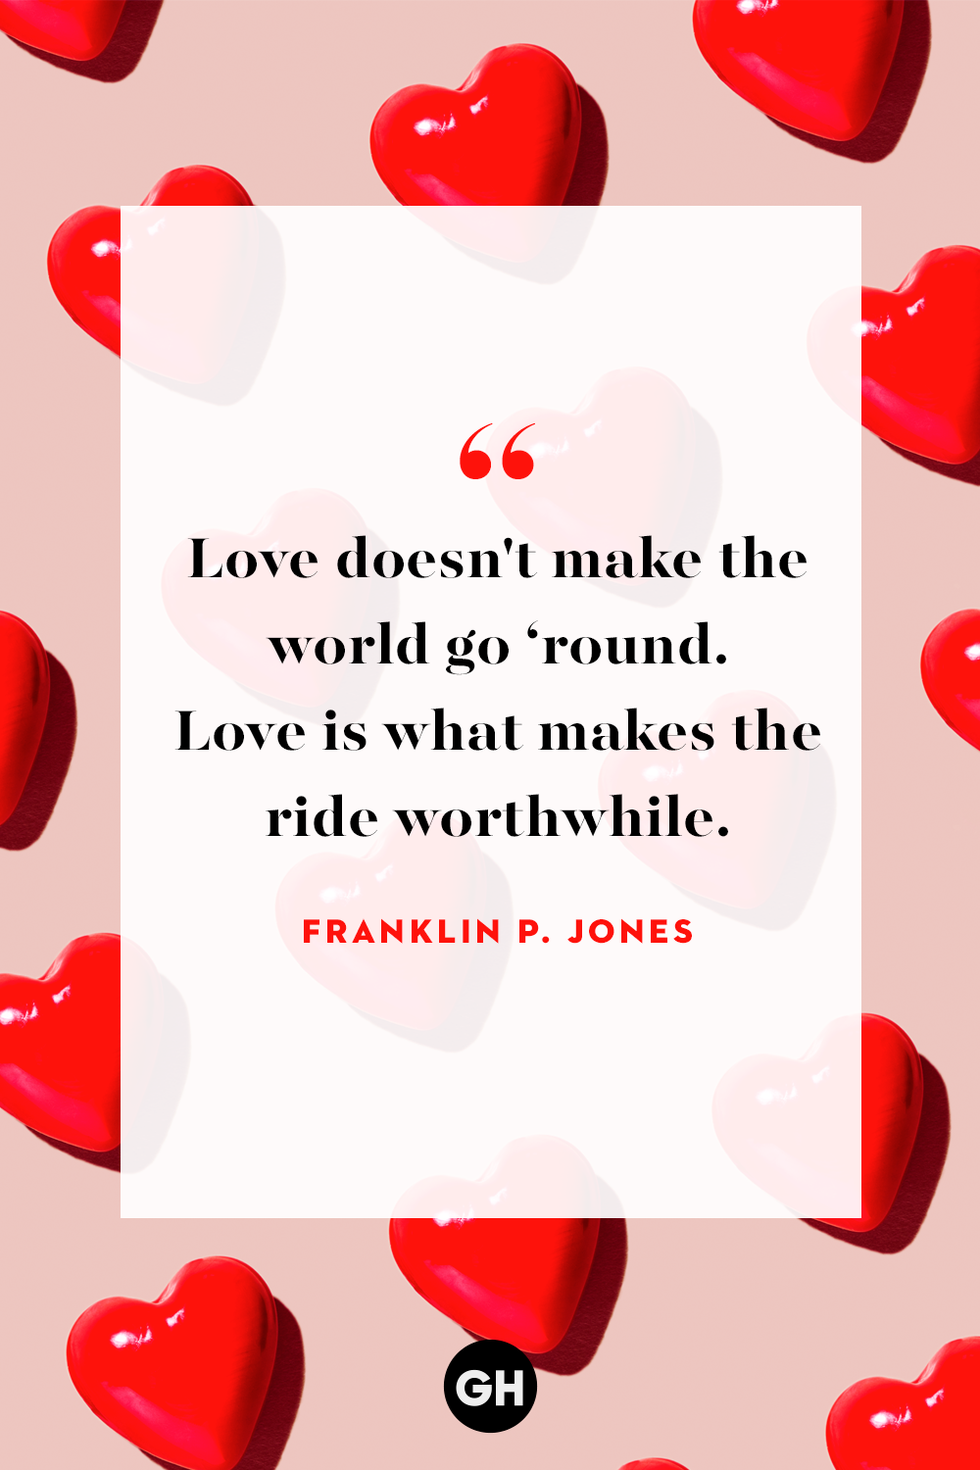 13 Super Cute True Love Quotes For Him Or Her